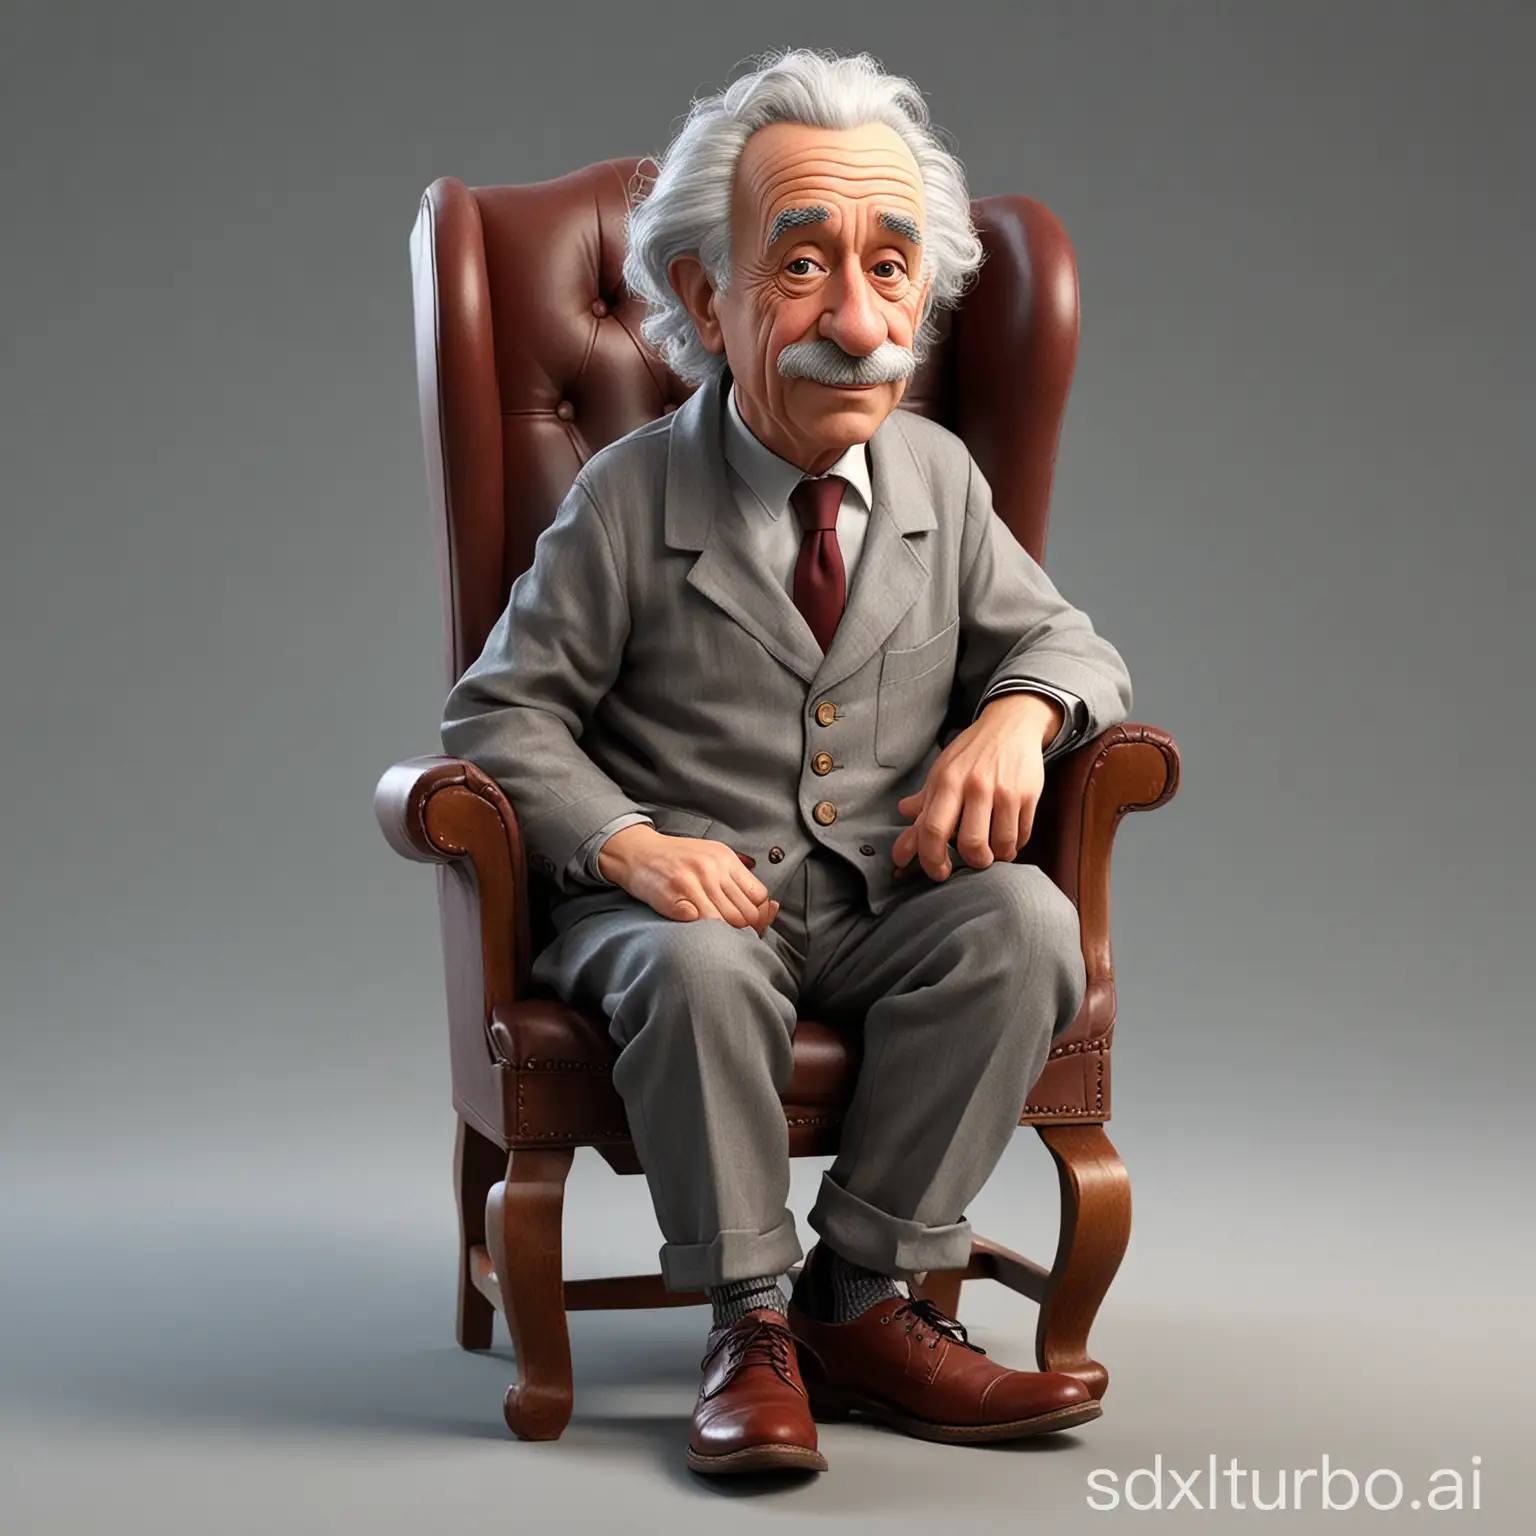  Create a 3D Caricature Realistic Disney Pixar-style full body with a big head. "Albert Einstein" a 60-year-old man, is sitting relaxed in a classic dark red wingback wooden chair, the wood texture is clear. Wearing a white t-shirt covered with a gray jacket, wearing worn gray cloth trousers. Wearing brown shoes with black shoelaces. Sit with your legs crossed, your right hand holding a short wooden stick, your left hand placed on the edge of the chair. The background should contrast with the color of the chair and clothing, enhancing the overall composition of the picture. Use soft photography lighting, dramatic overhead lighting, very high image quality, clear character details, UHD, 16k. (The input is already in English, so no translation needed.)